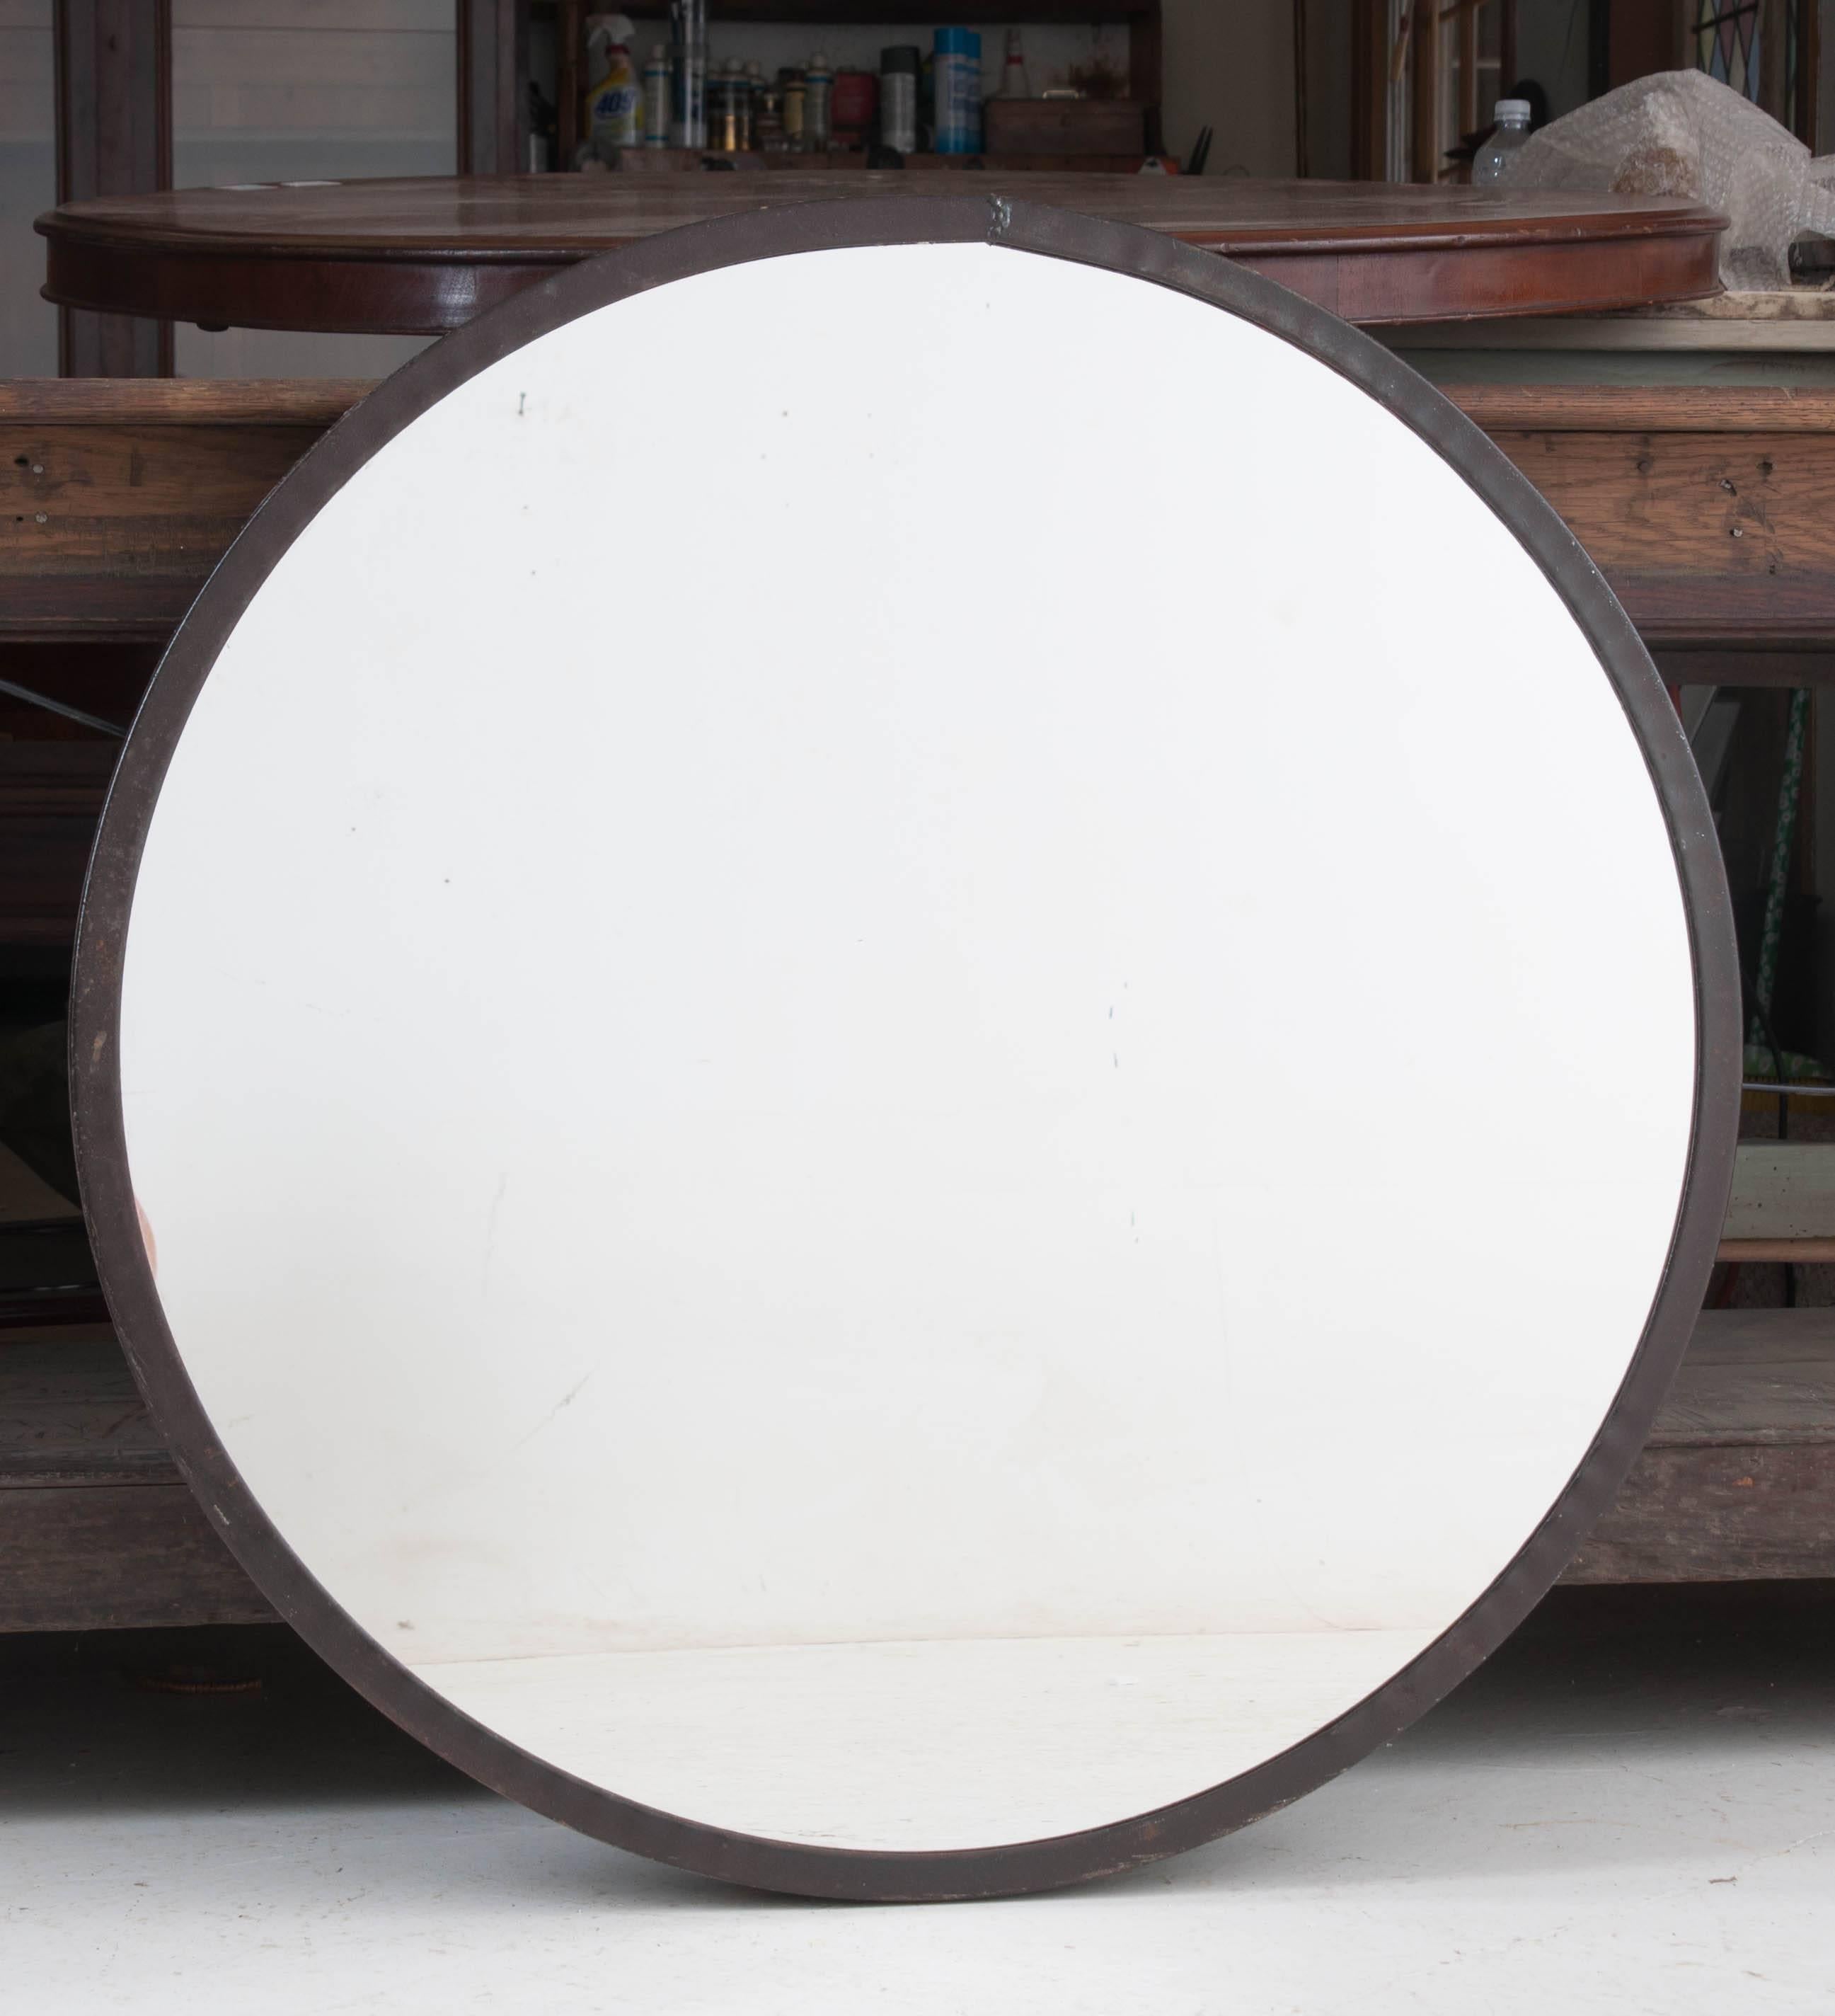 Round mirrors with metal frames are a unique and fun way to add an element of modernity to your space. This mirror has a 35 1/2